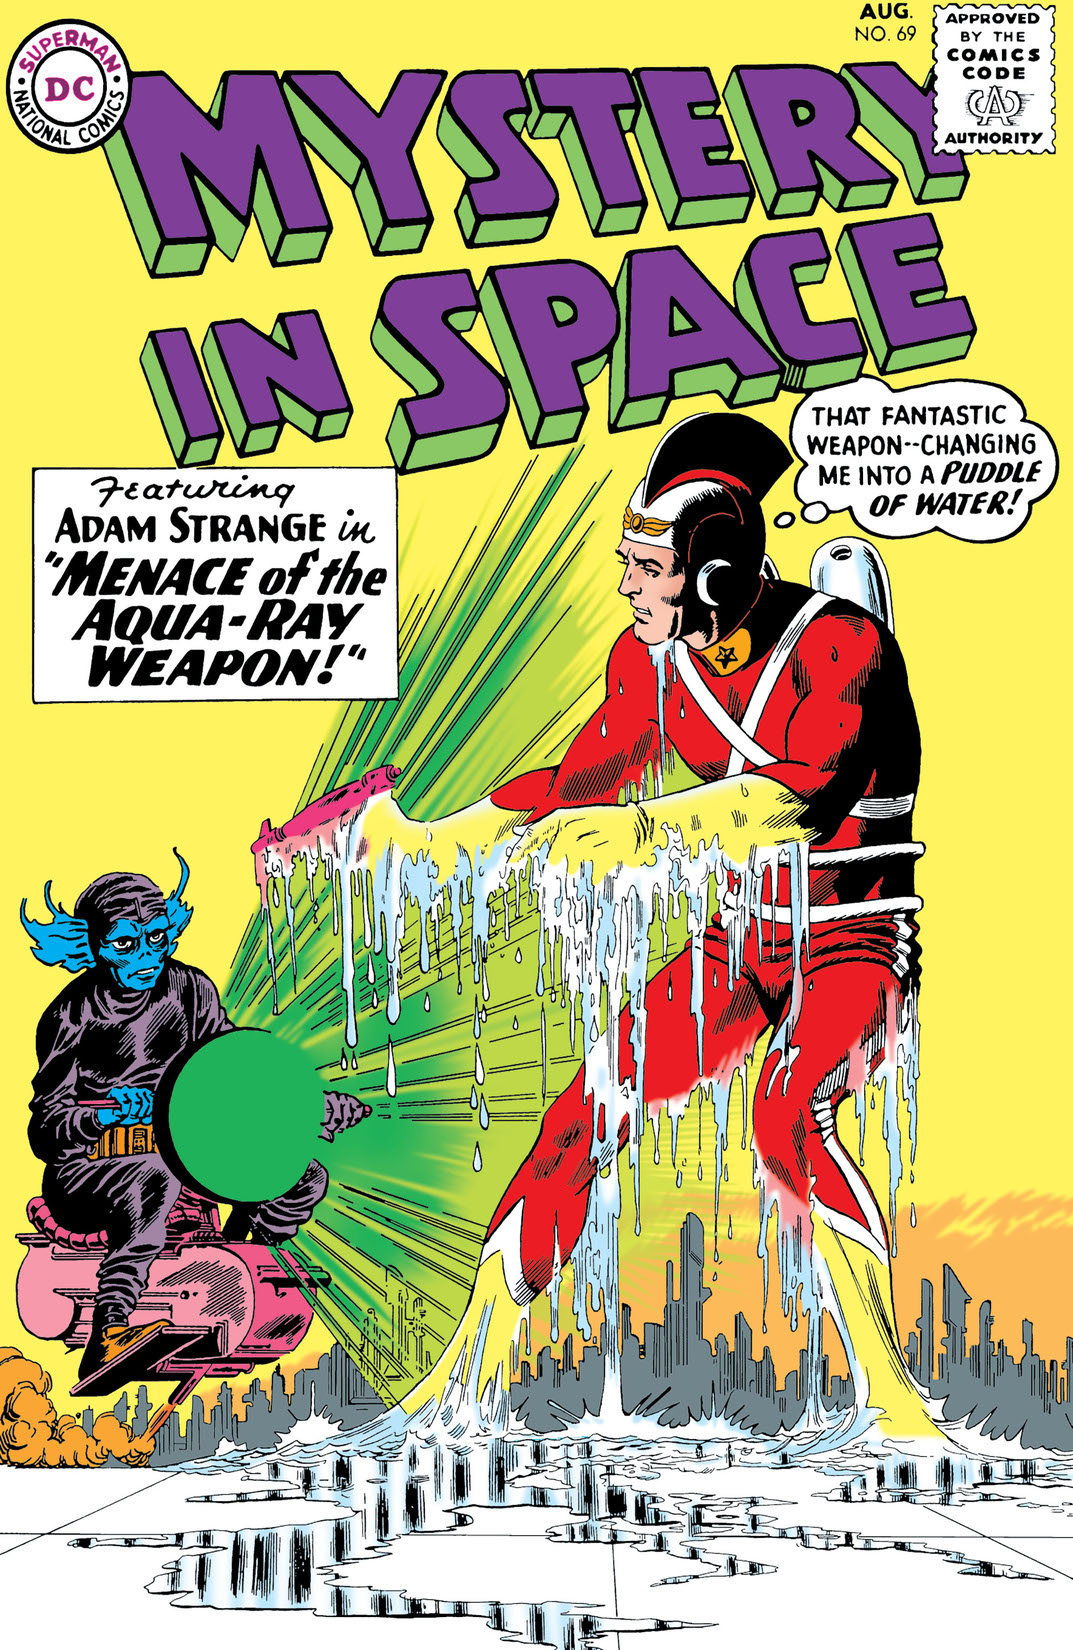 Mystery in Space (1951-) #69 preview images